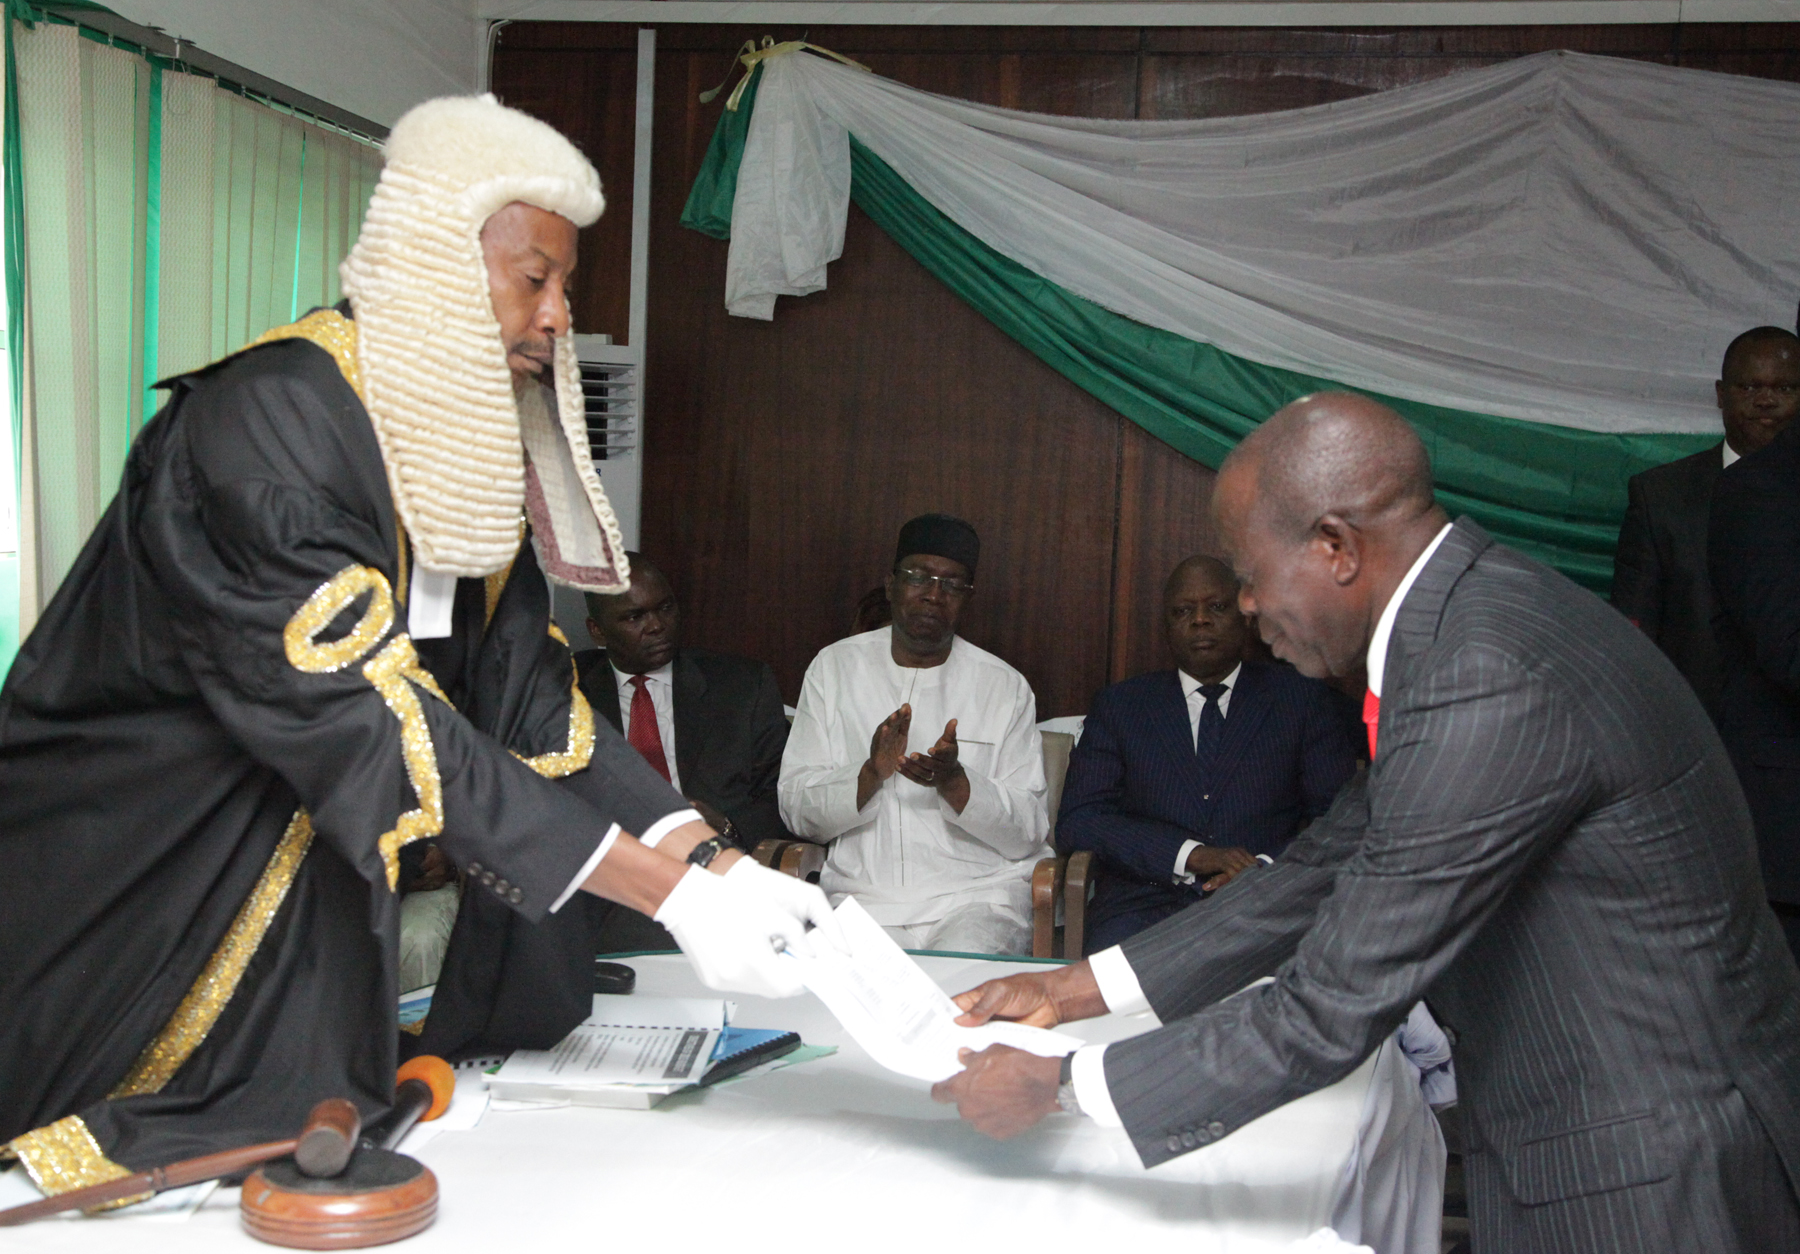 Governor Adams Oshiomhole Edo State presents a copy of the State's 2015 Budget to Rt. Hon Uyi Igbe, Speaker, Edo State House of Assembly at the presentation of the state's 2015 budget, yesterday (Tuesday). Photo by Alltimepost.com